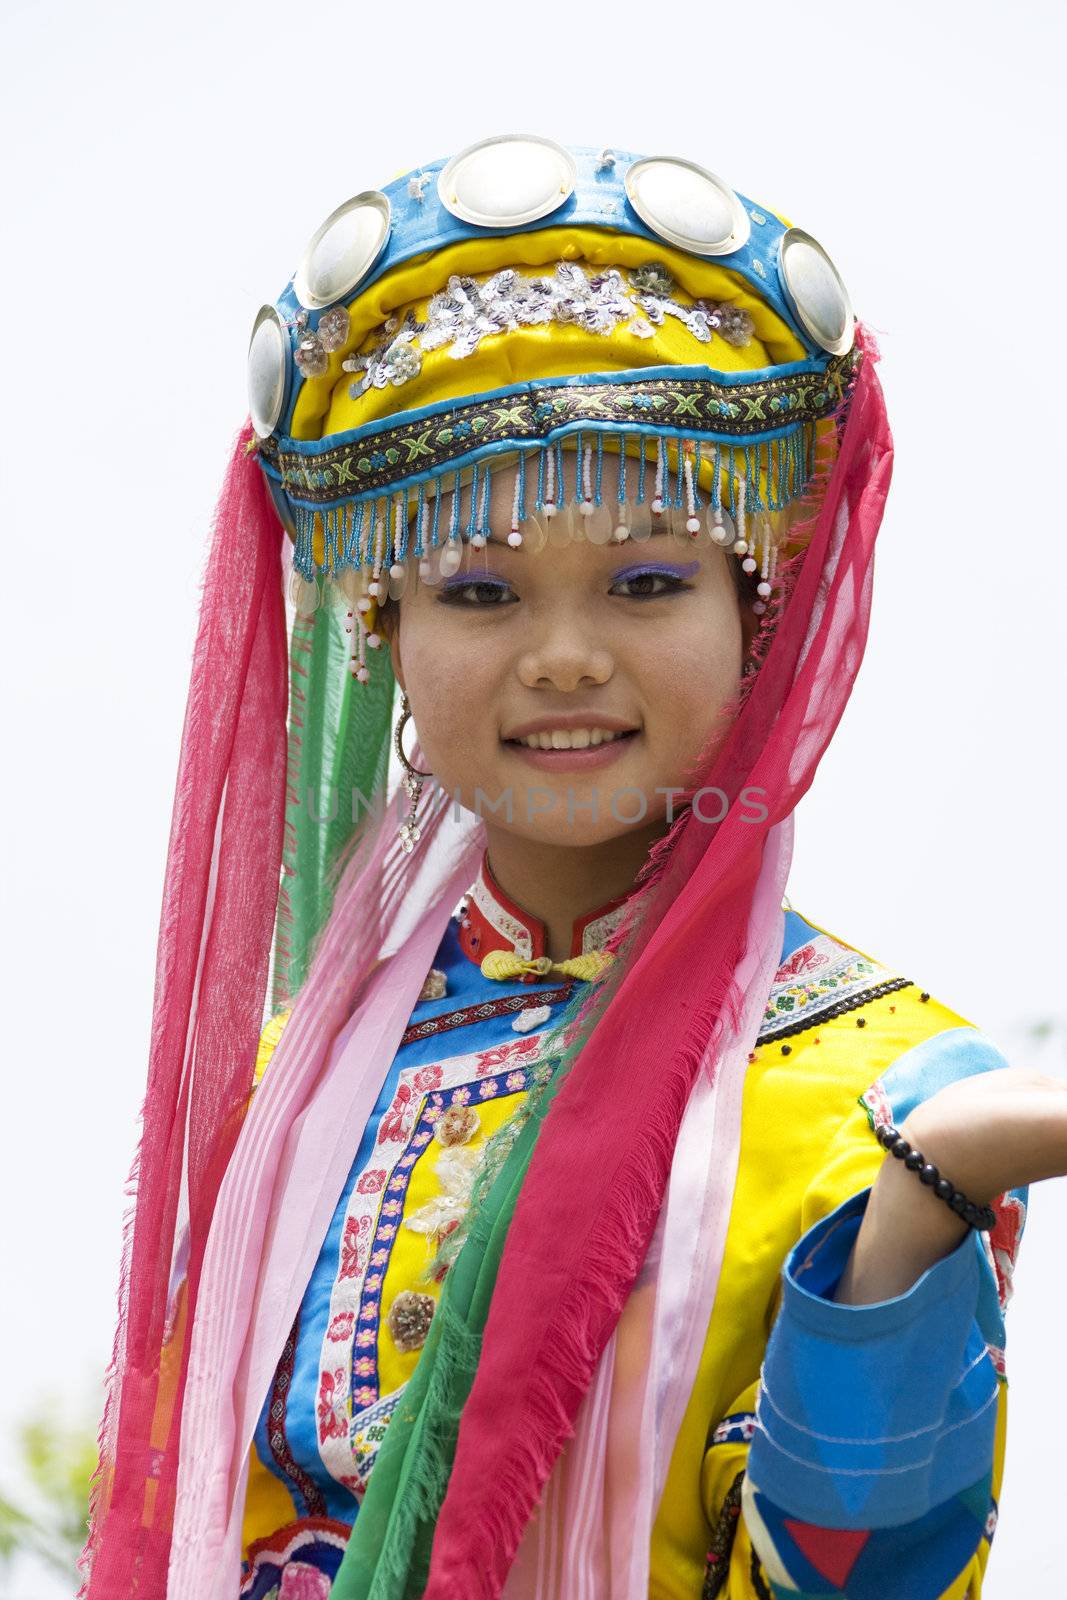 Chinese Girl in Traditional Ethnic Dress by shariffc